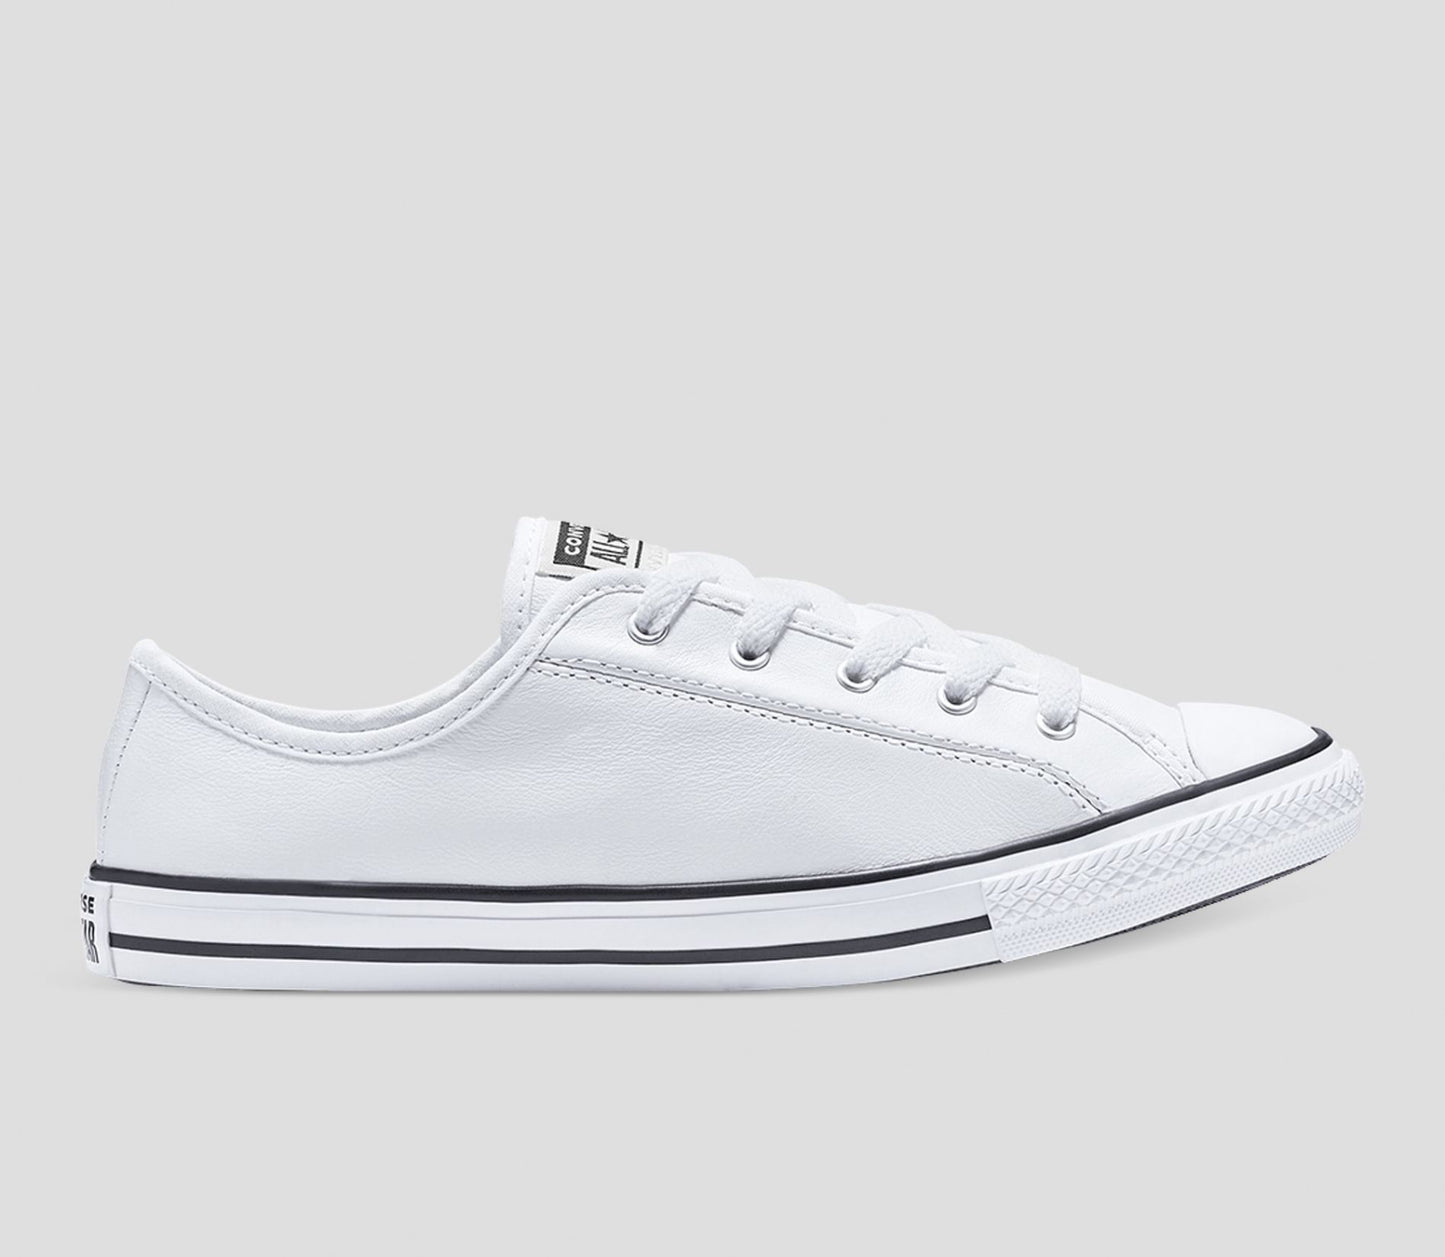 CONVERSE Chuck Taylor All Star Womens Leather Dainty Shoe - White - VENUE.